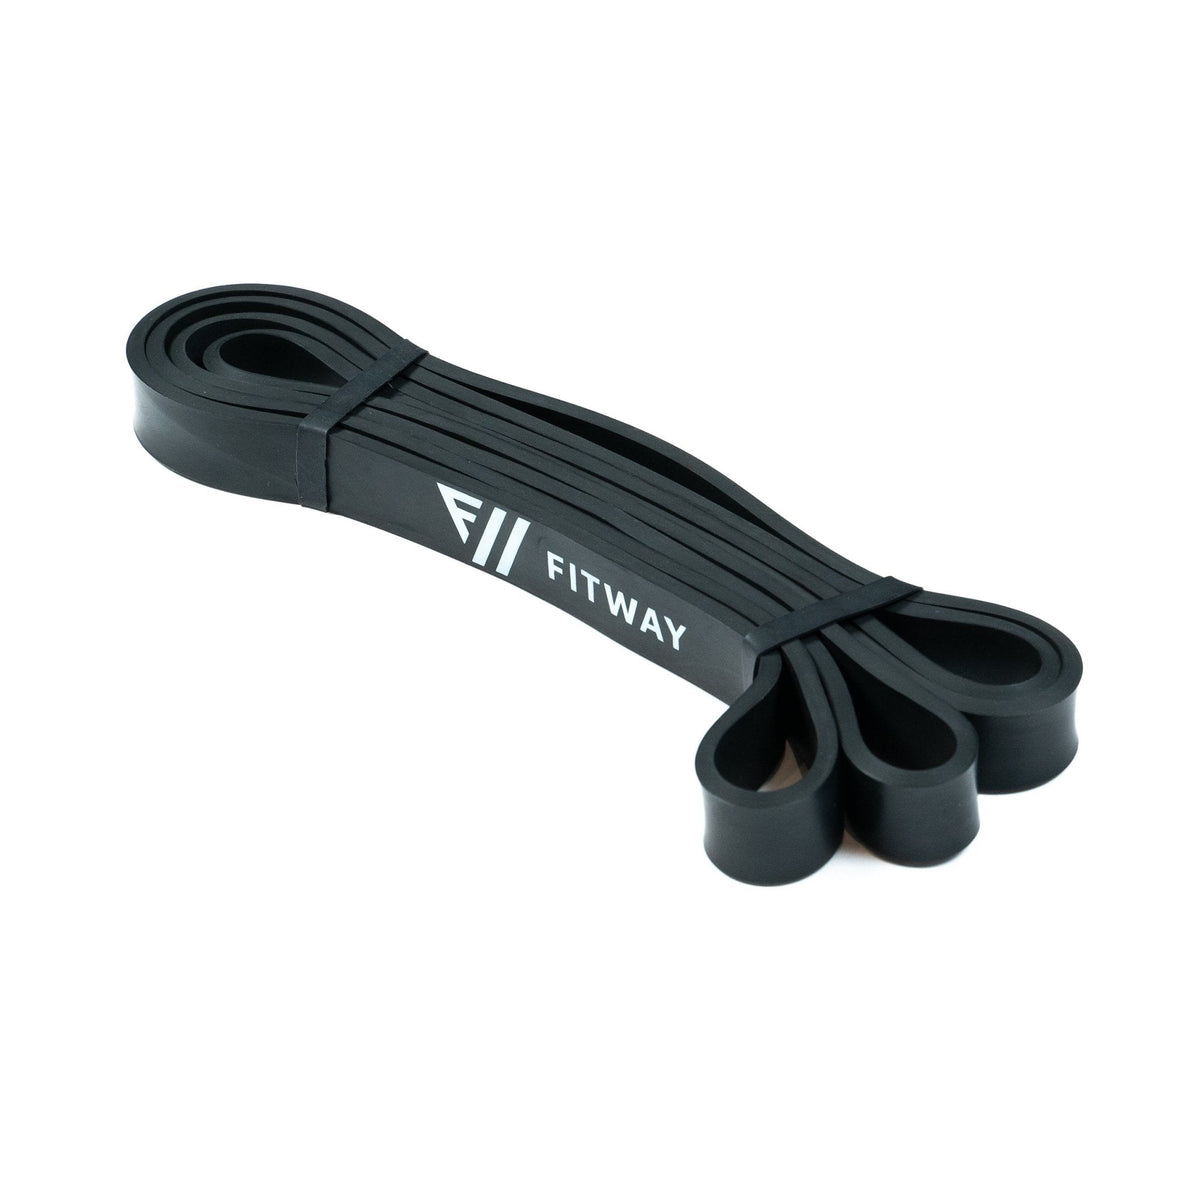 FitWay Equip. FitWay Black Power Band - 22mm - Fitness Experience